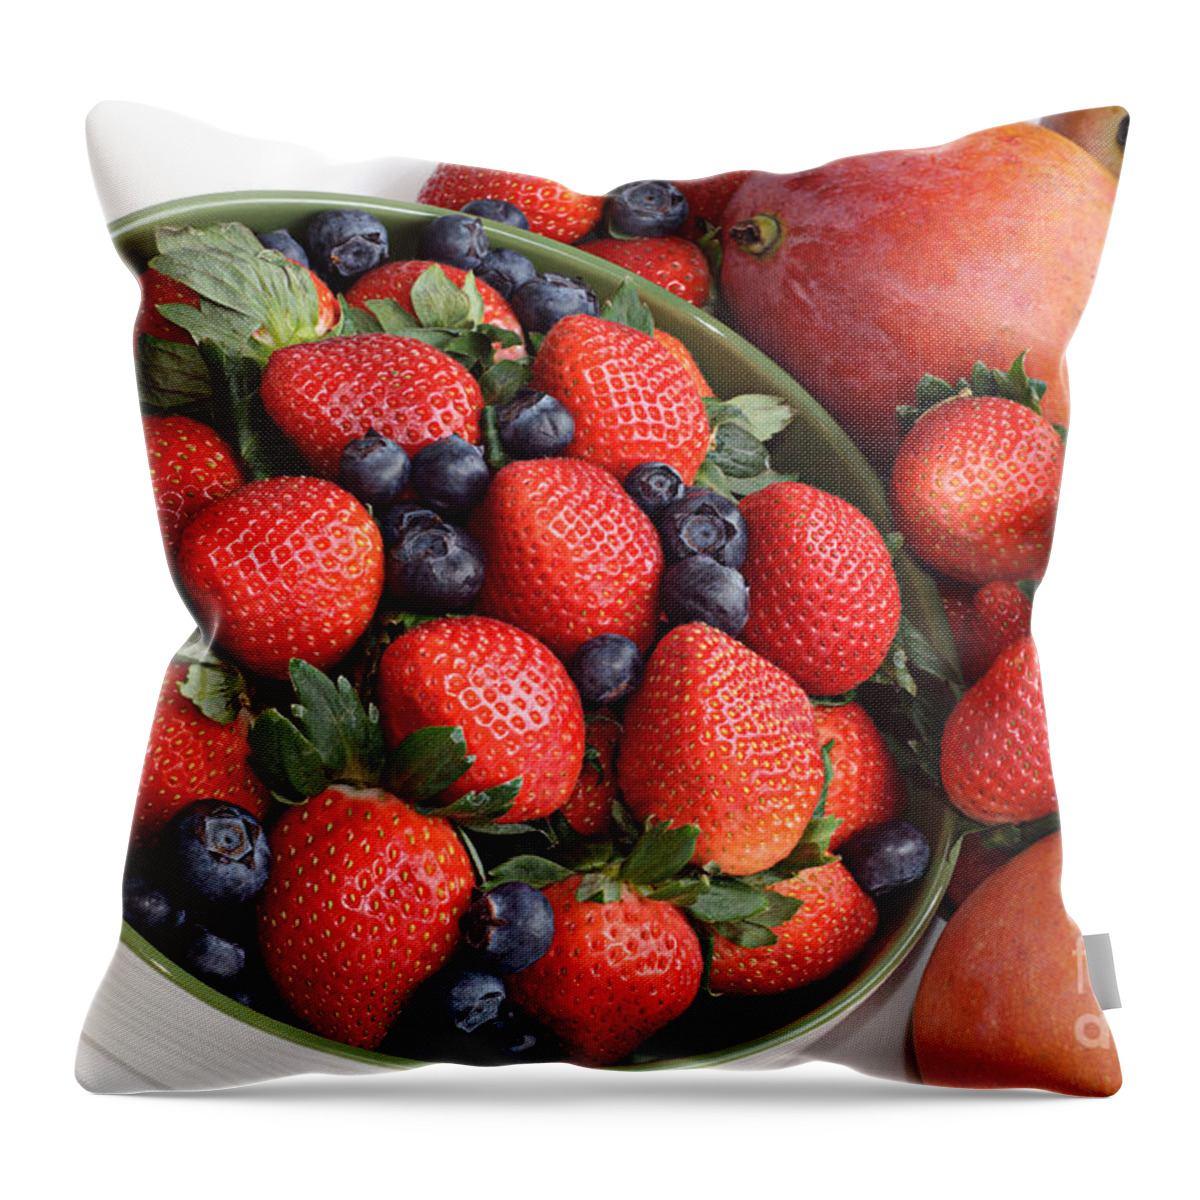 Fruit Throw Pillow featuring the photograph Strawberries Blueberries Mangoes And A Banana - Fruit Tray by Andee Design